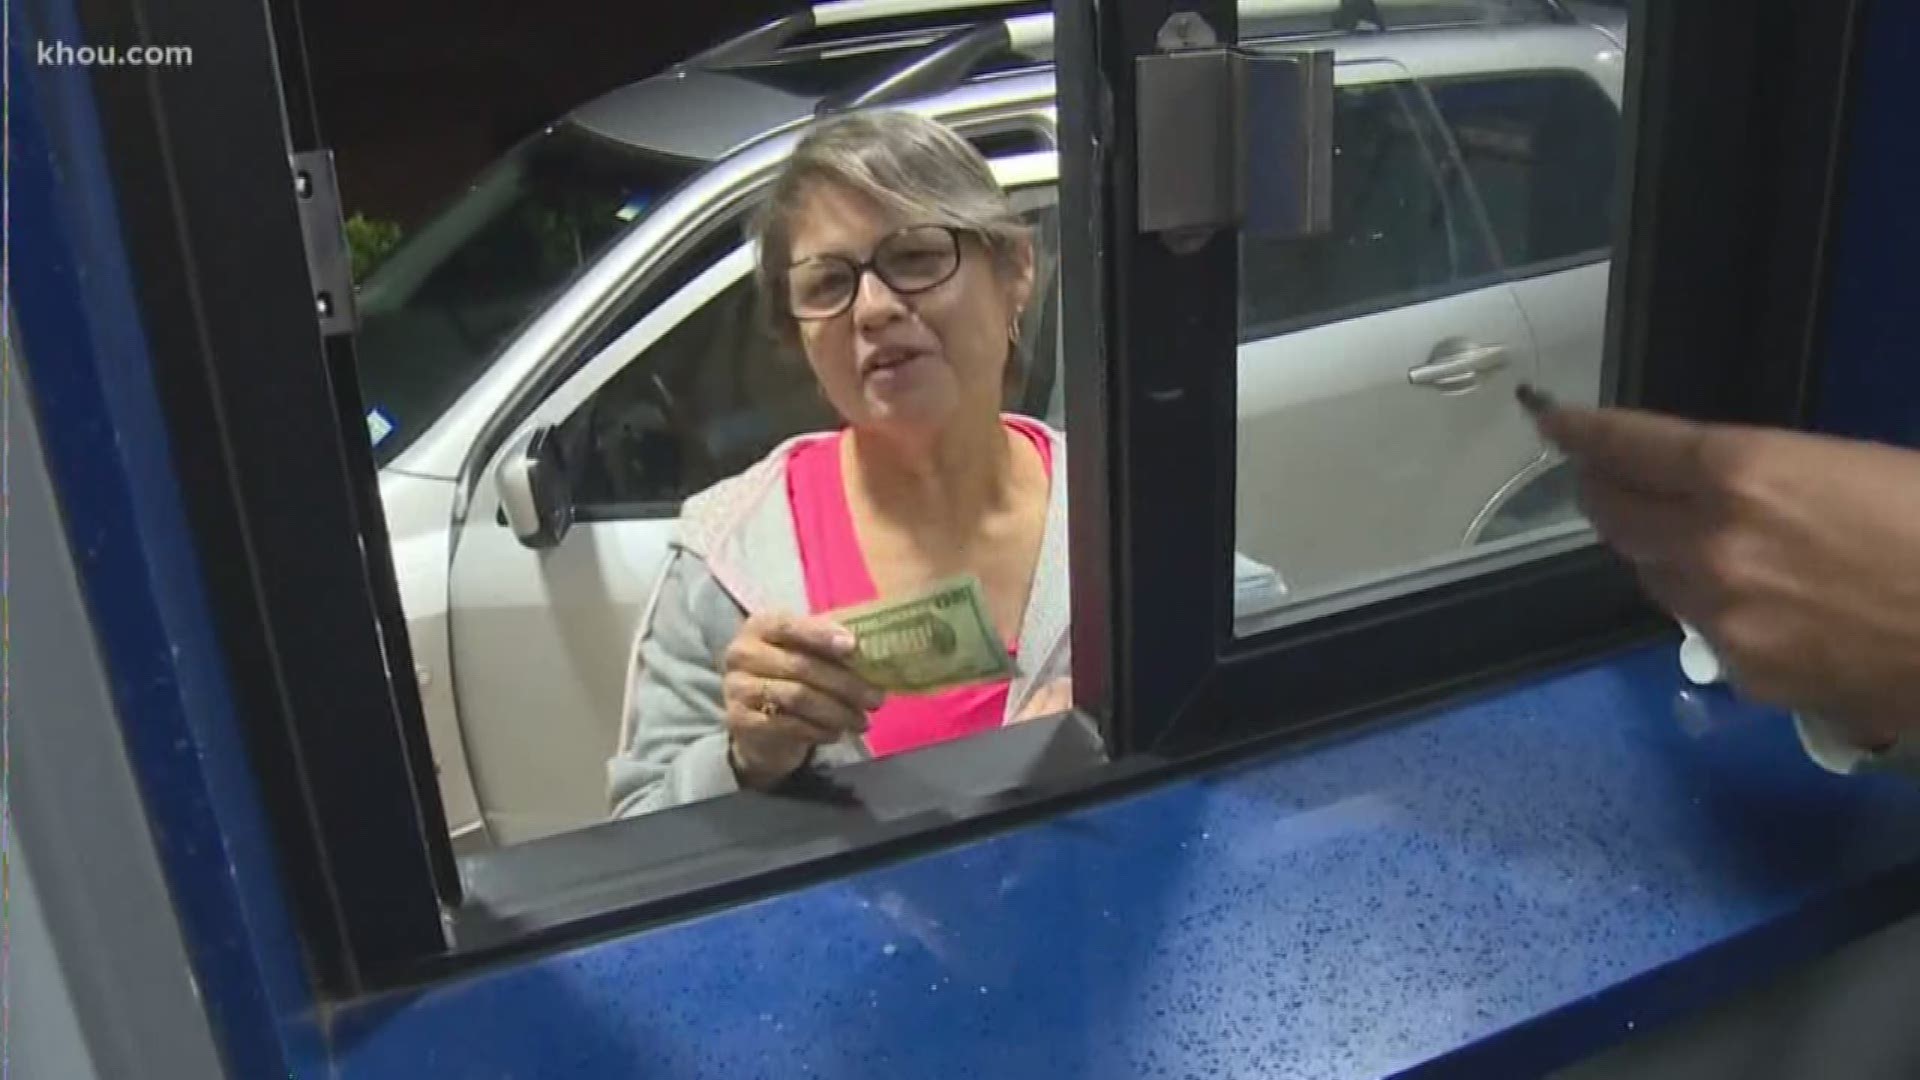 The No. 1 lottery seller in Texas now includes a drive-thru lottery window.